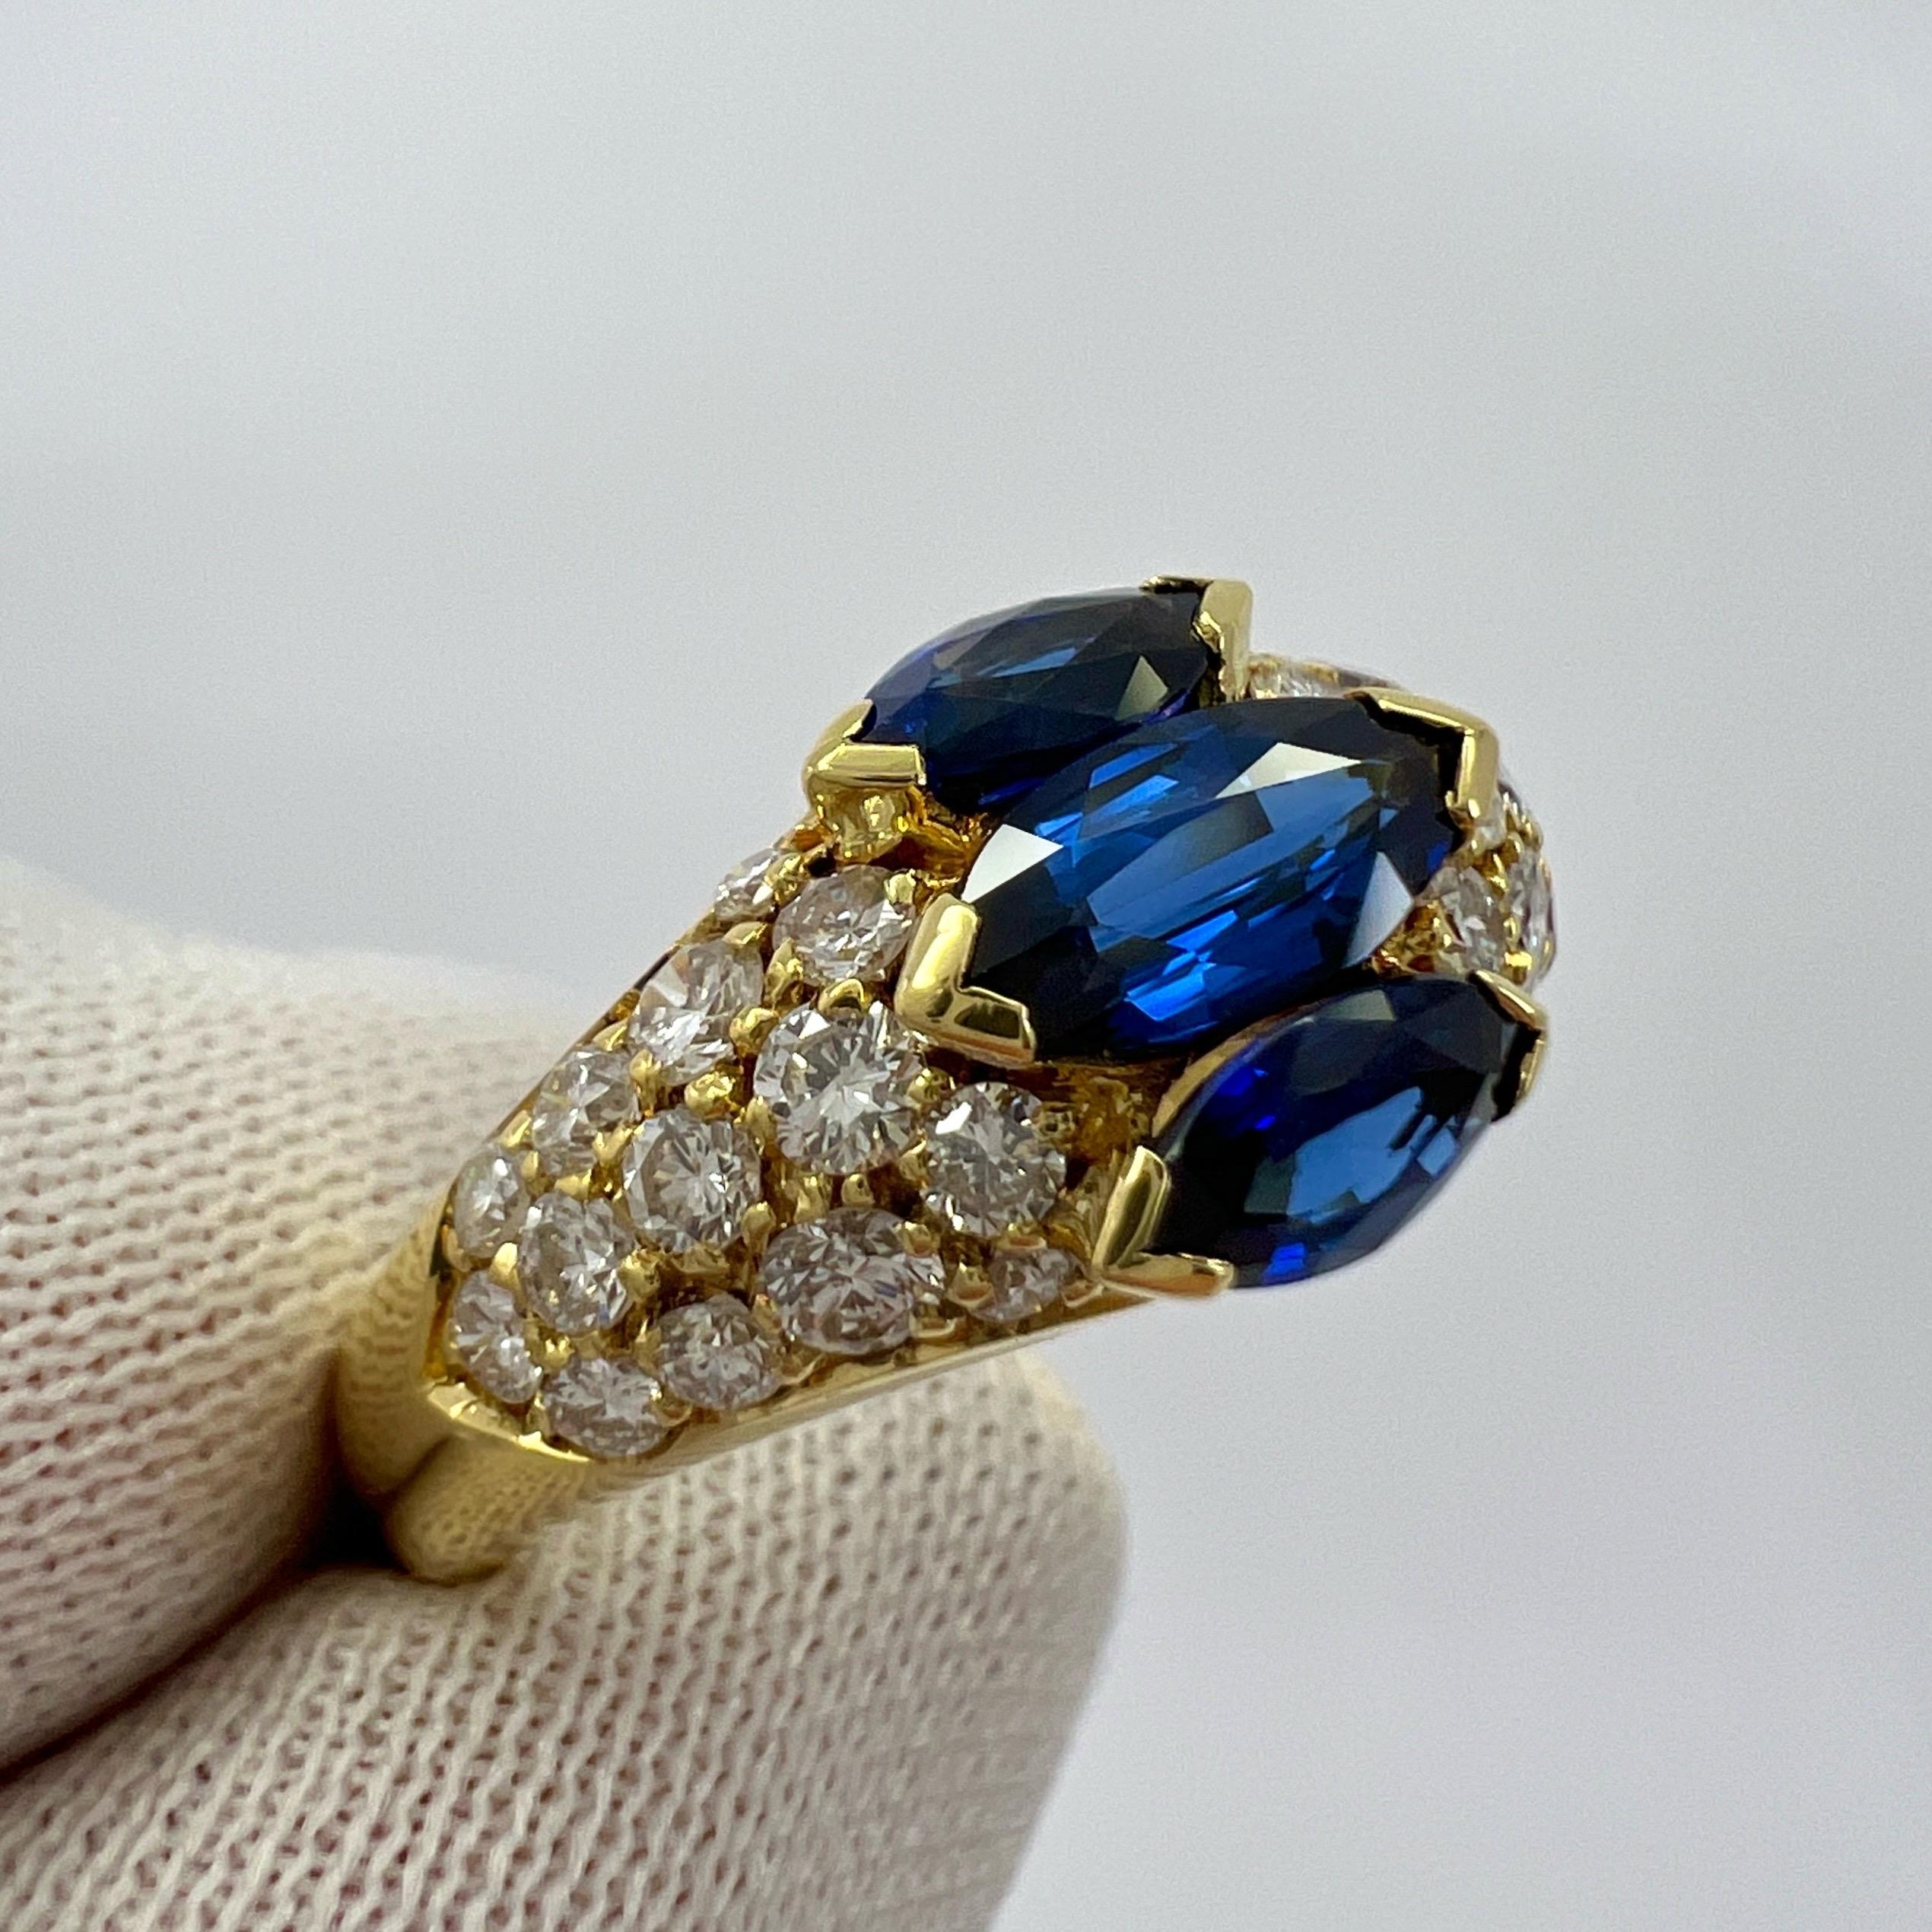 Rare Vintage Van Cleef & Arpels Marquise Blue Sapphire And Diamond Cocktail Ring 1